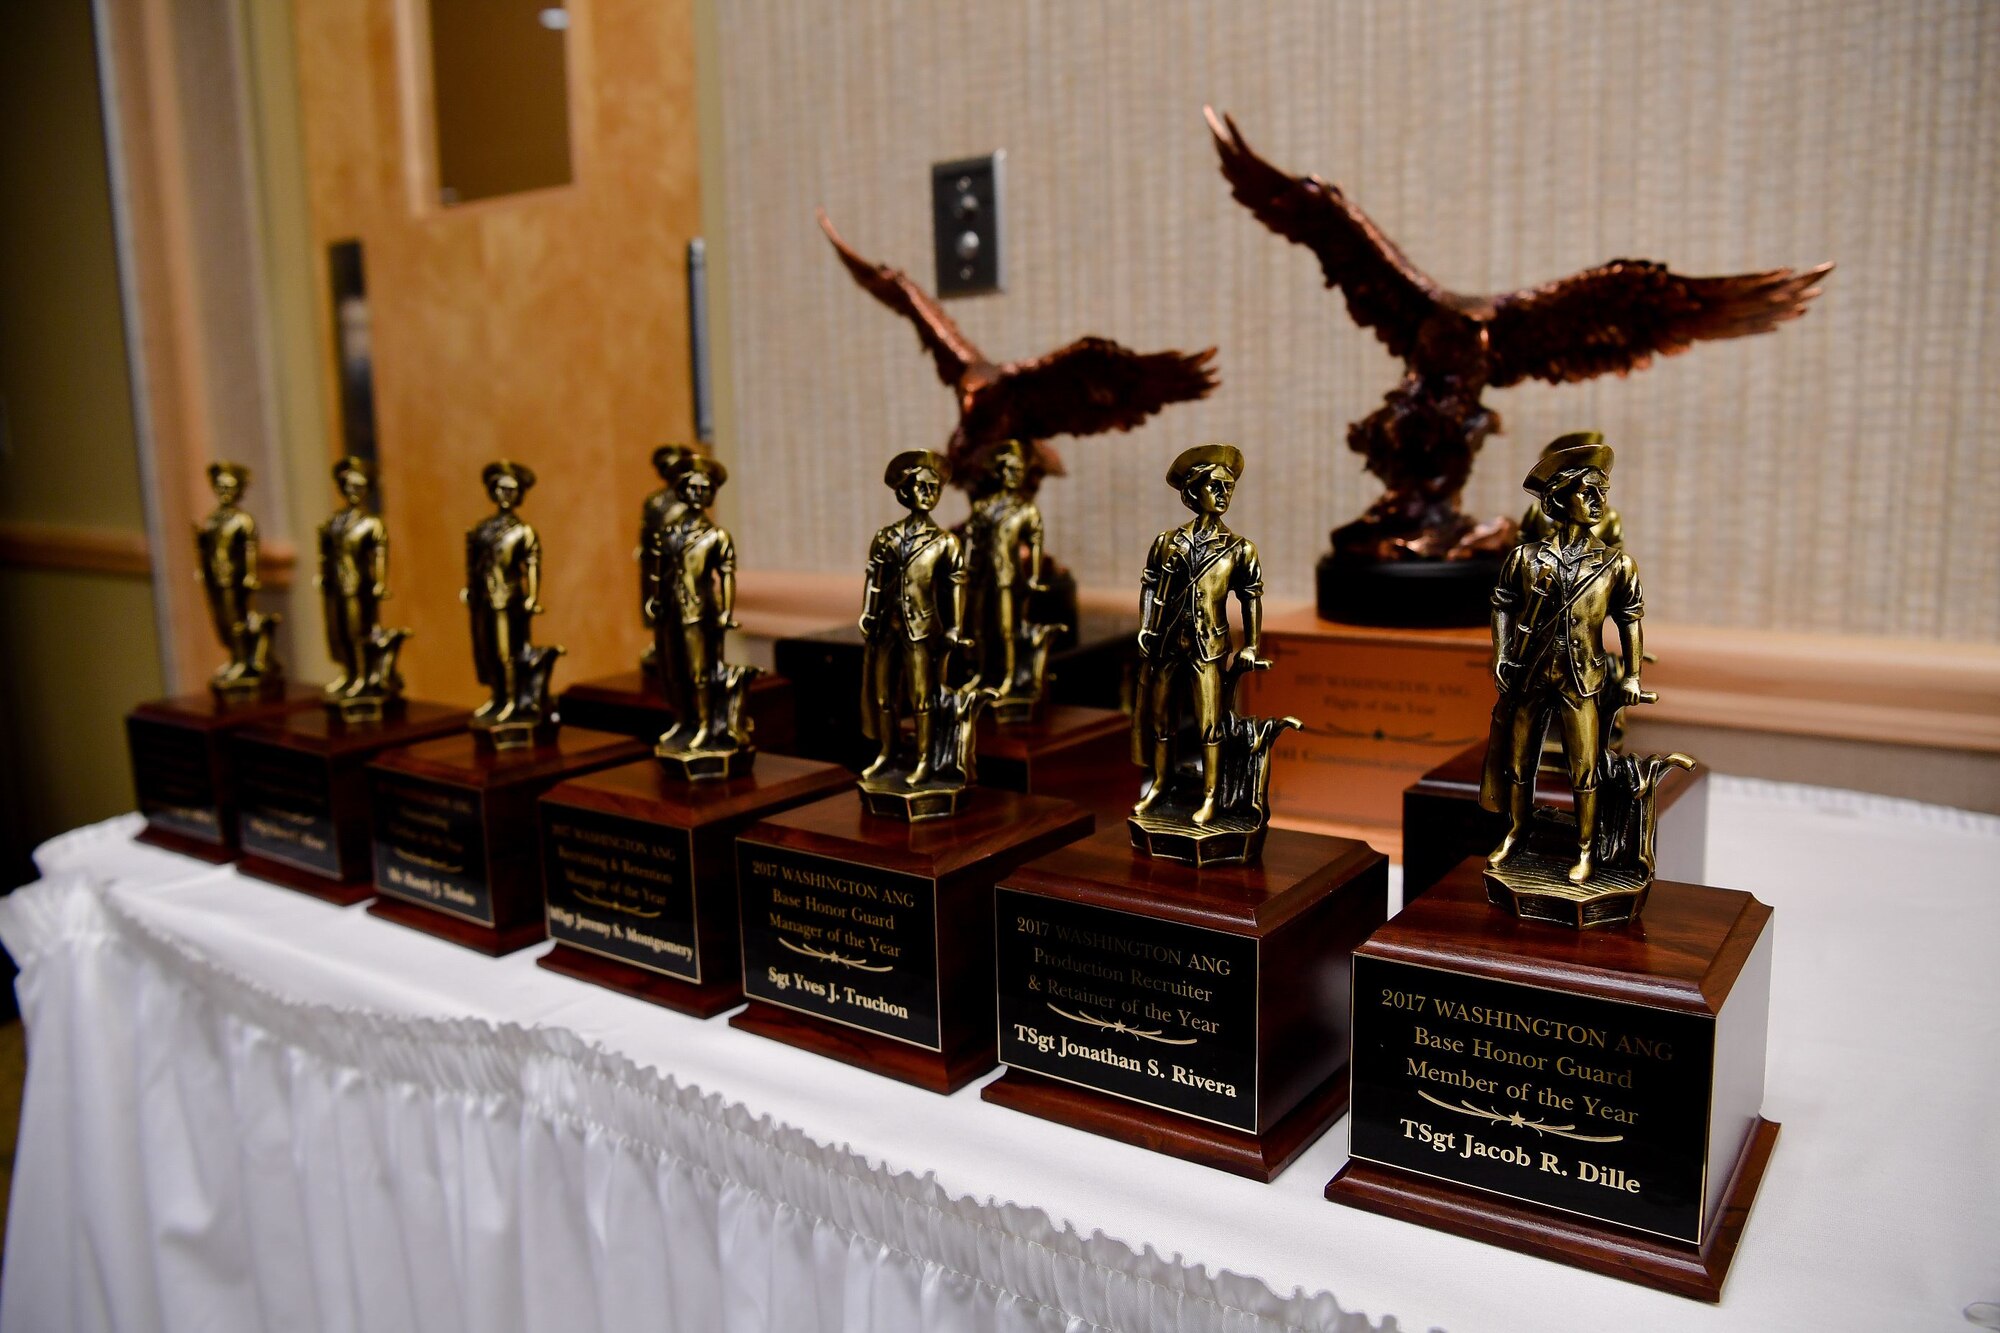 The Washington Air National Guard's 9th Annual Awards trophies are ready to be awarded to the top Airmen in 12 categories.  The banquet was held at the American Lake Conference Center on Joint Base Lewis-McChord, Washington, Jan. 27, 2018. (U.S. Air National Guard Photo by Tech. Sgt. Timothy Chacon)